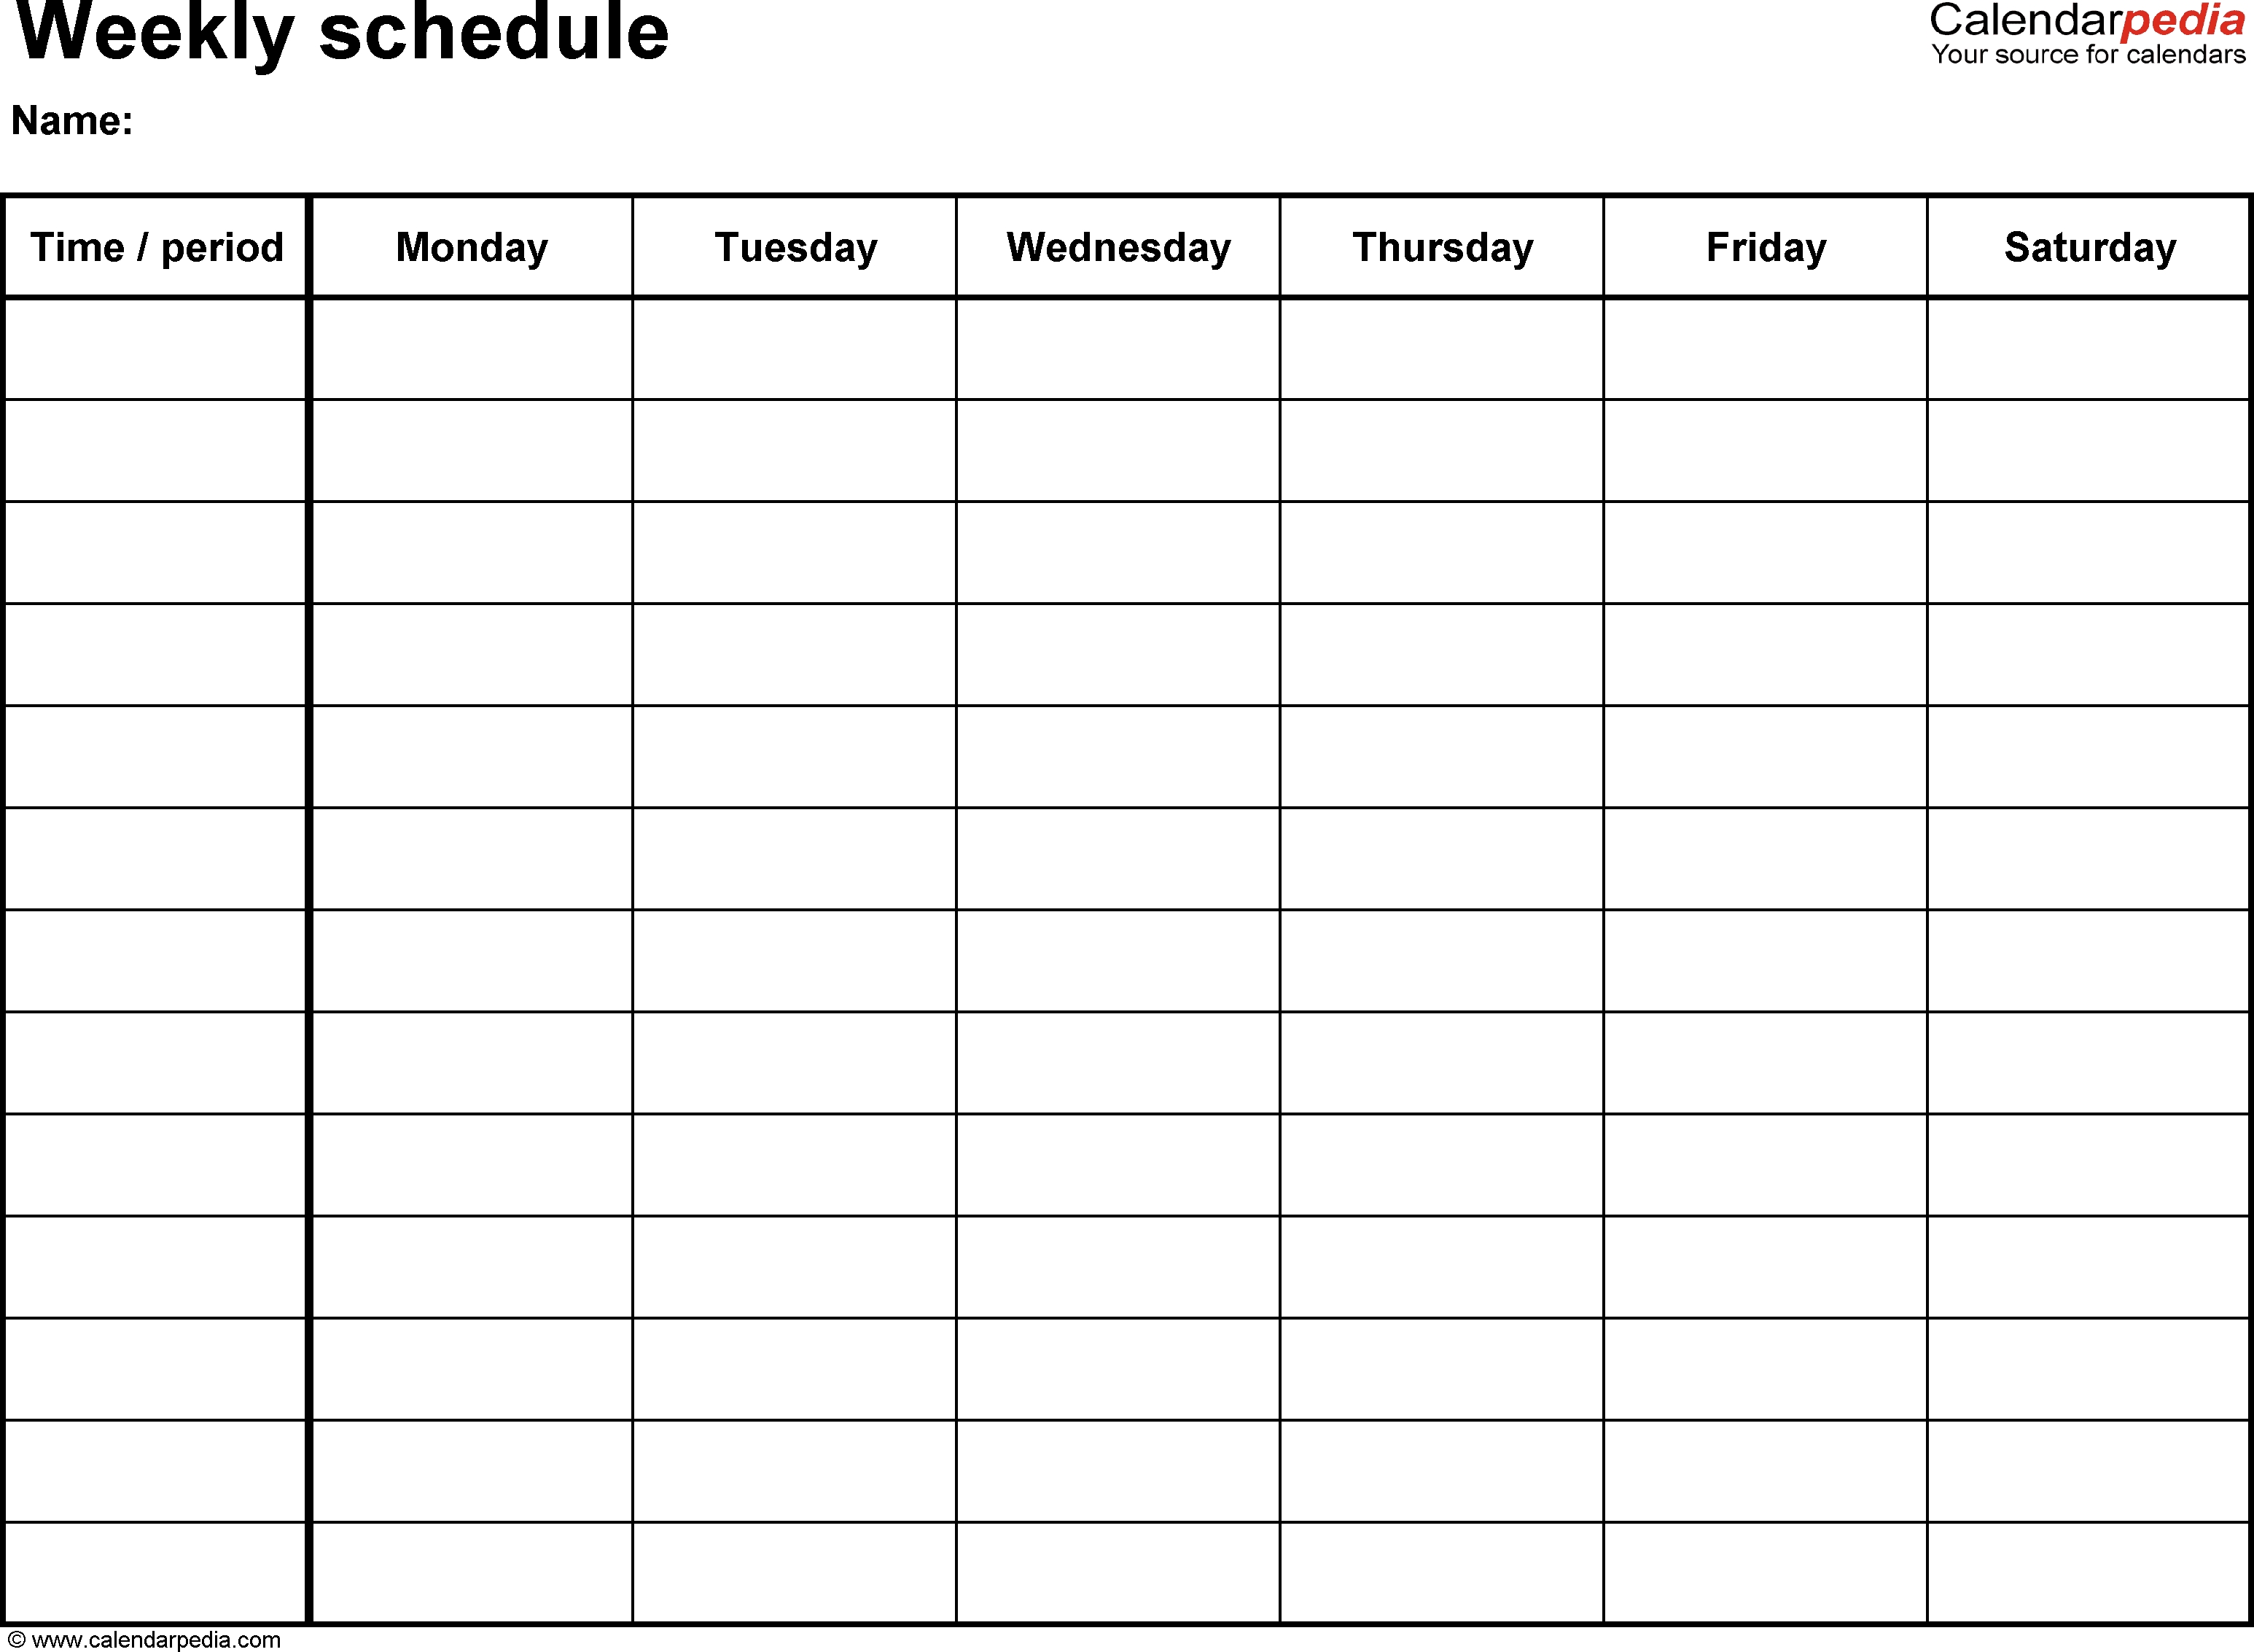 Free Weekly Schedule Templates For Excel - 18 Templates-Monday Friday Calendar Template Printable